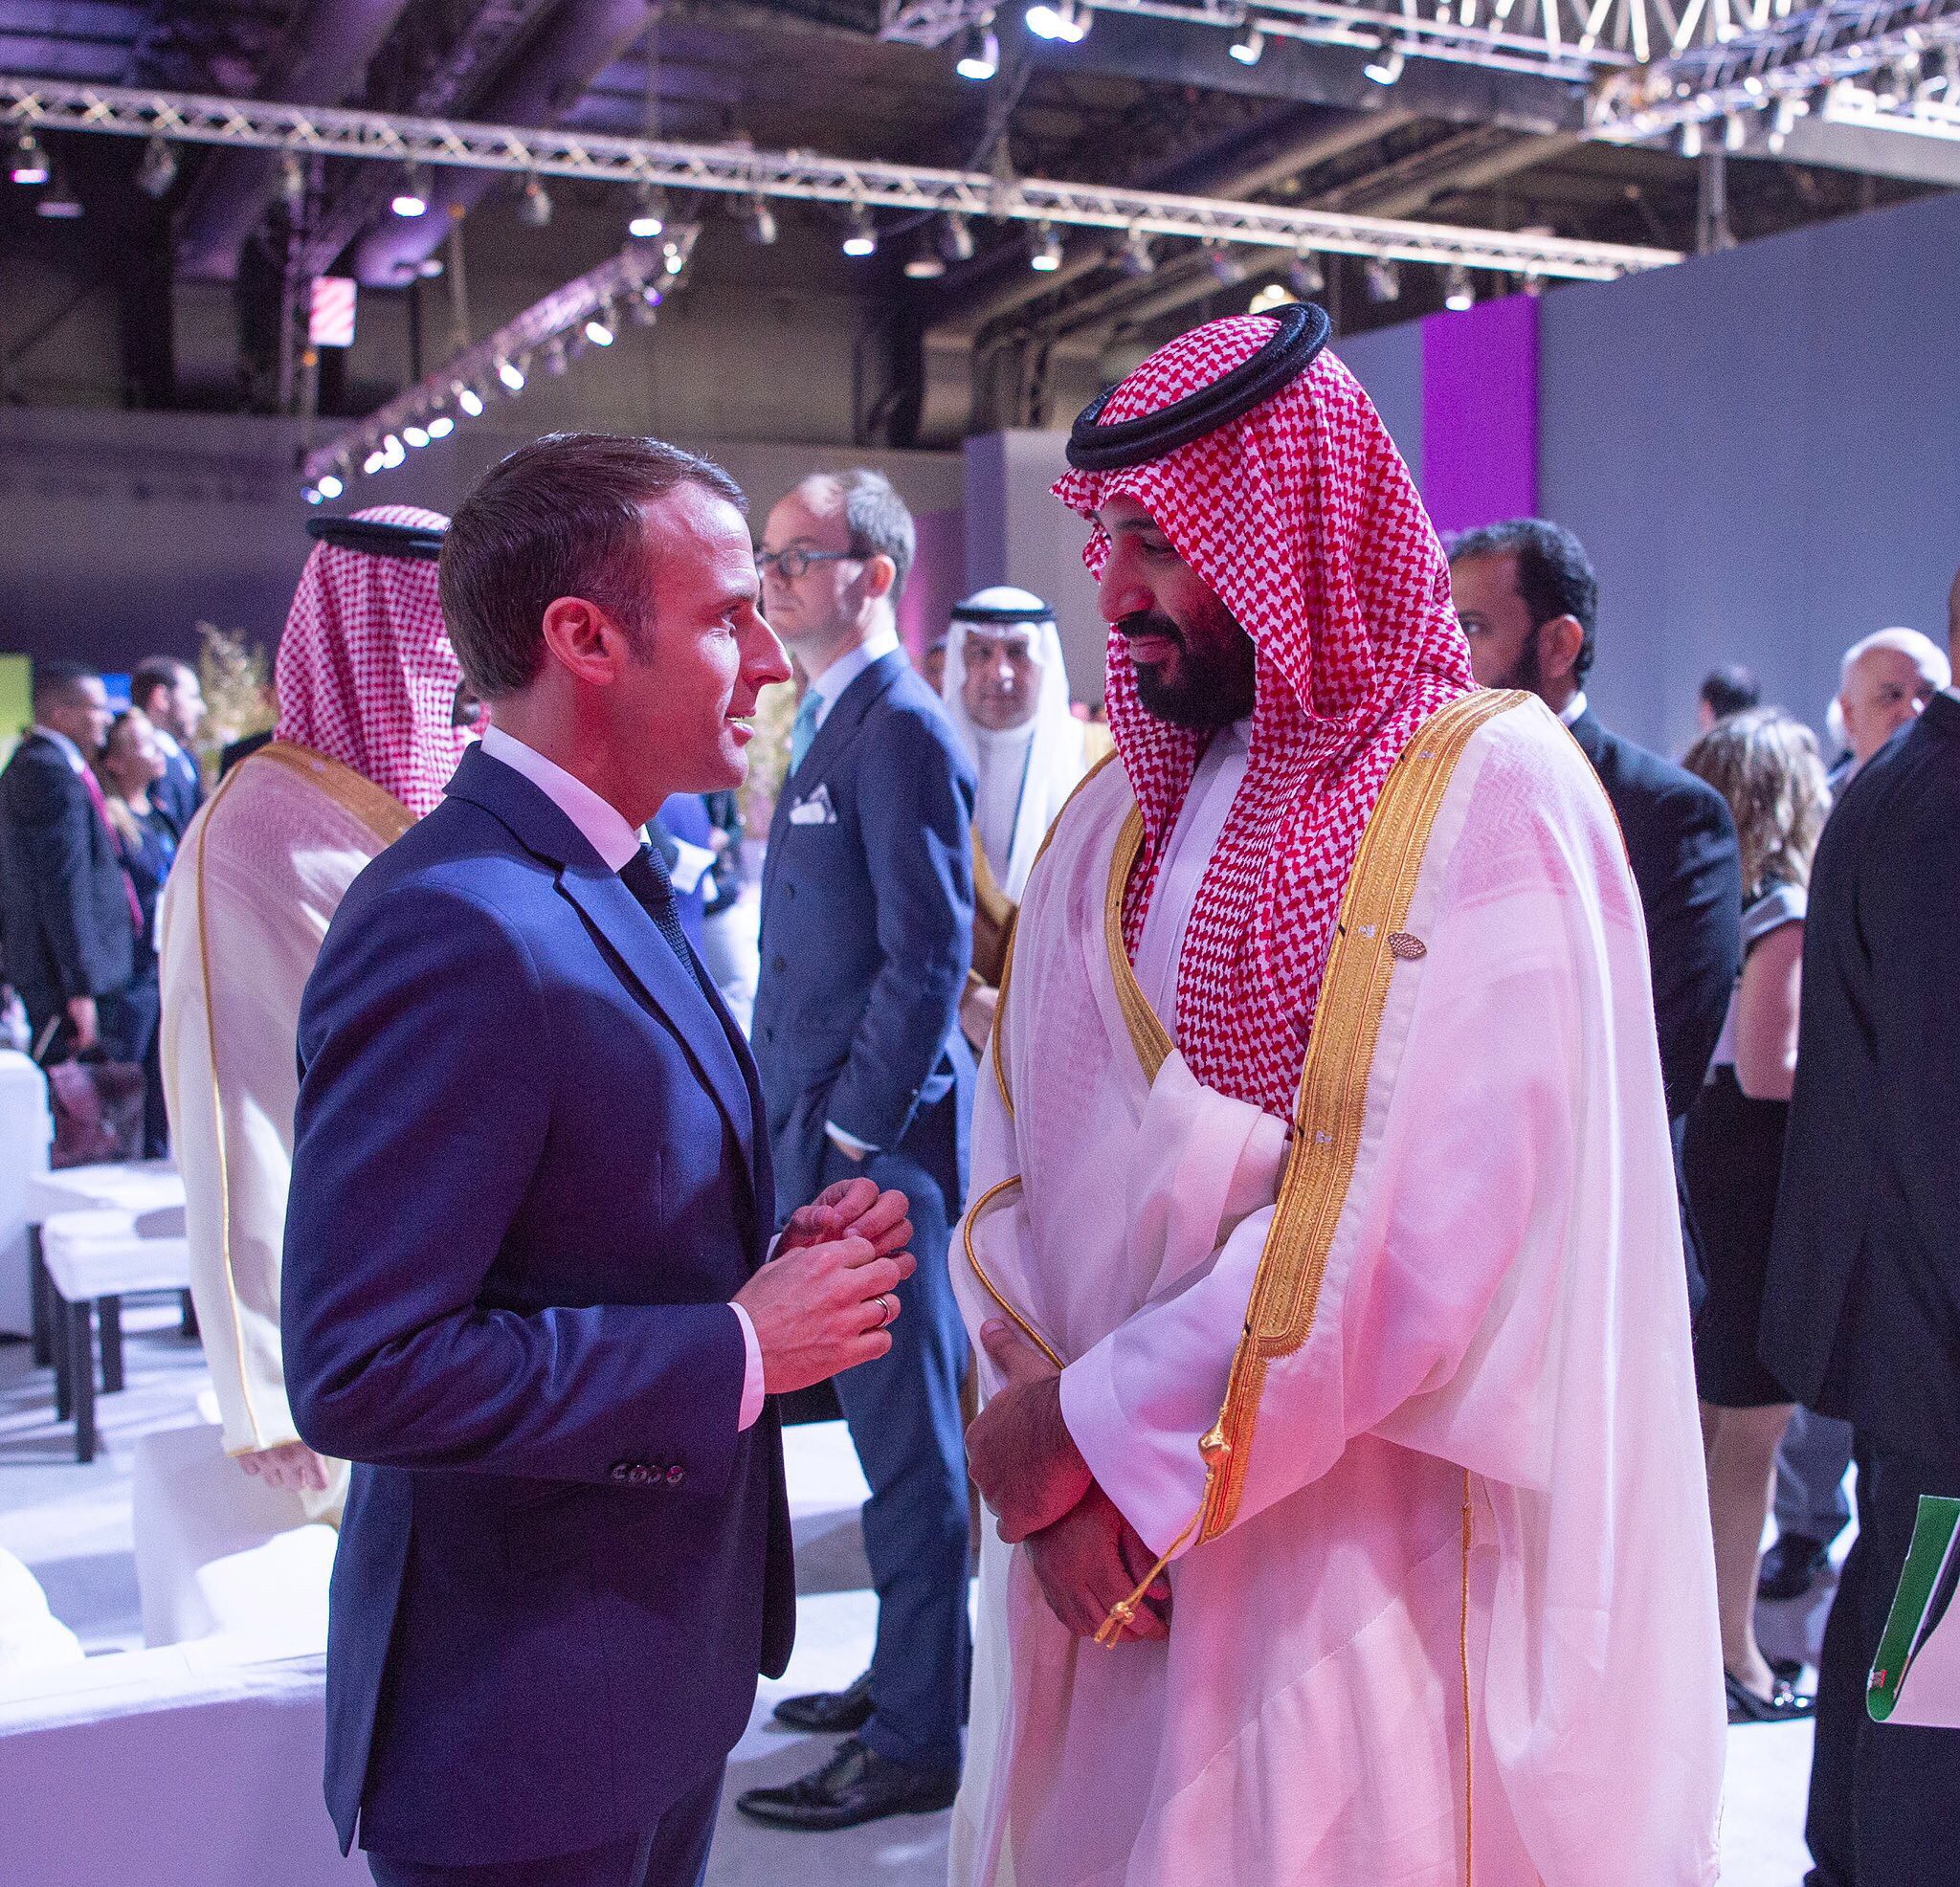 French President Emmanuel Macron talks to Saudi Crown Prince Mohammad bin Salman during the G20 summit in Buenos Aires on November 30. Parts of their conversation were recorded, in which Macron was heard telling the crown prince “I am worried”. Photo: EPA-EFE / Saudi Royal Court Handout